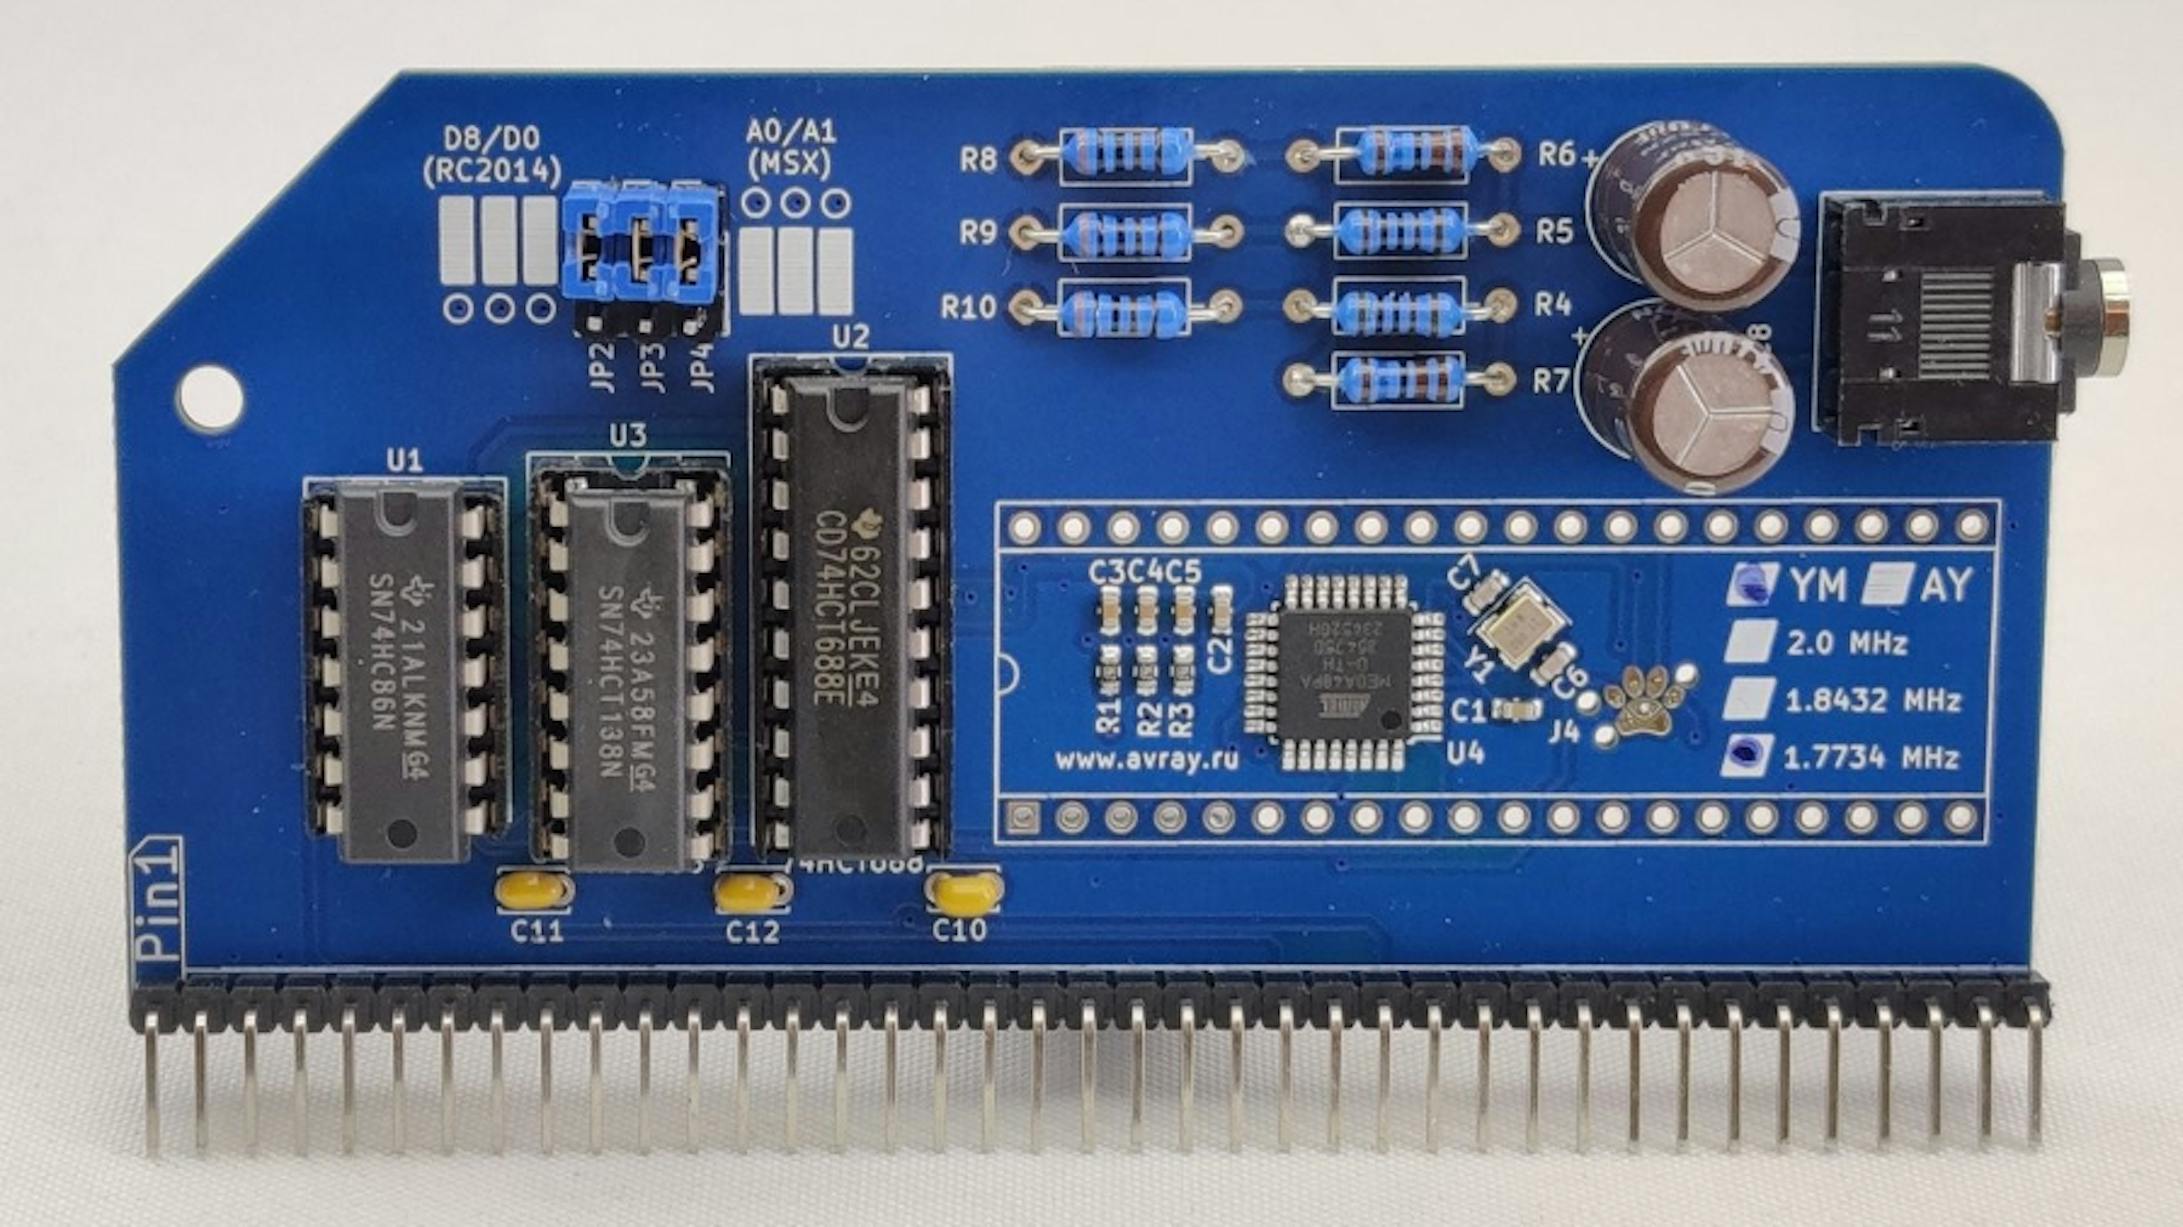 The RC2014 Gets a Smart Emulated Sound Module as Spencer Owen Aims 